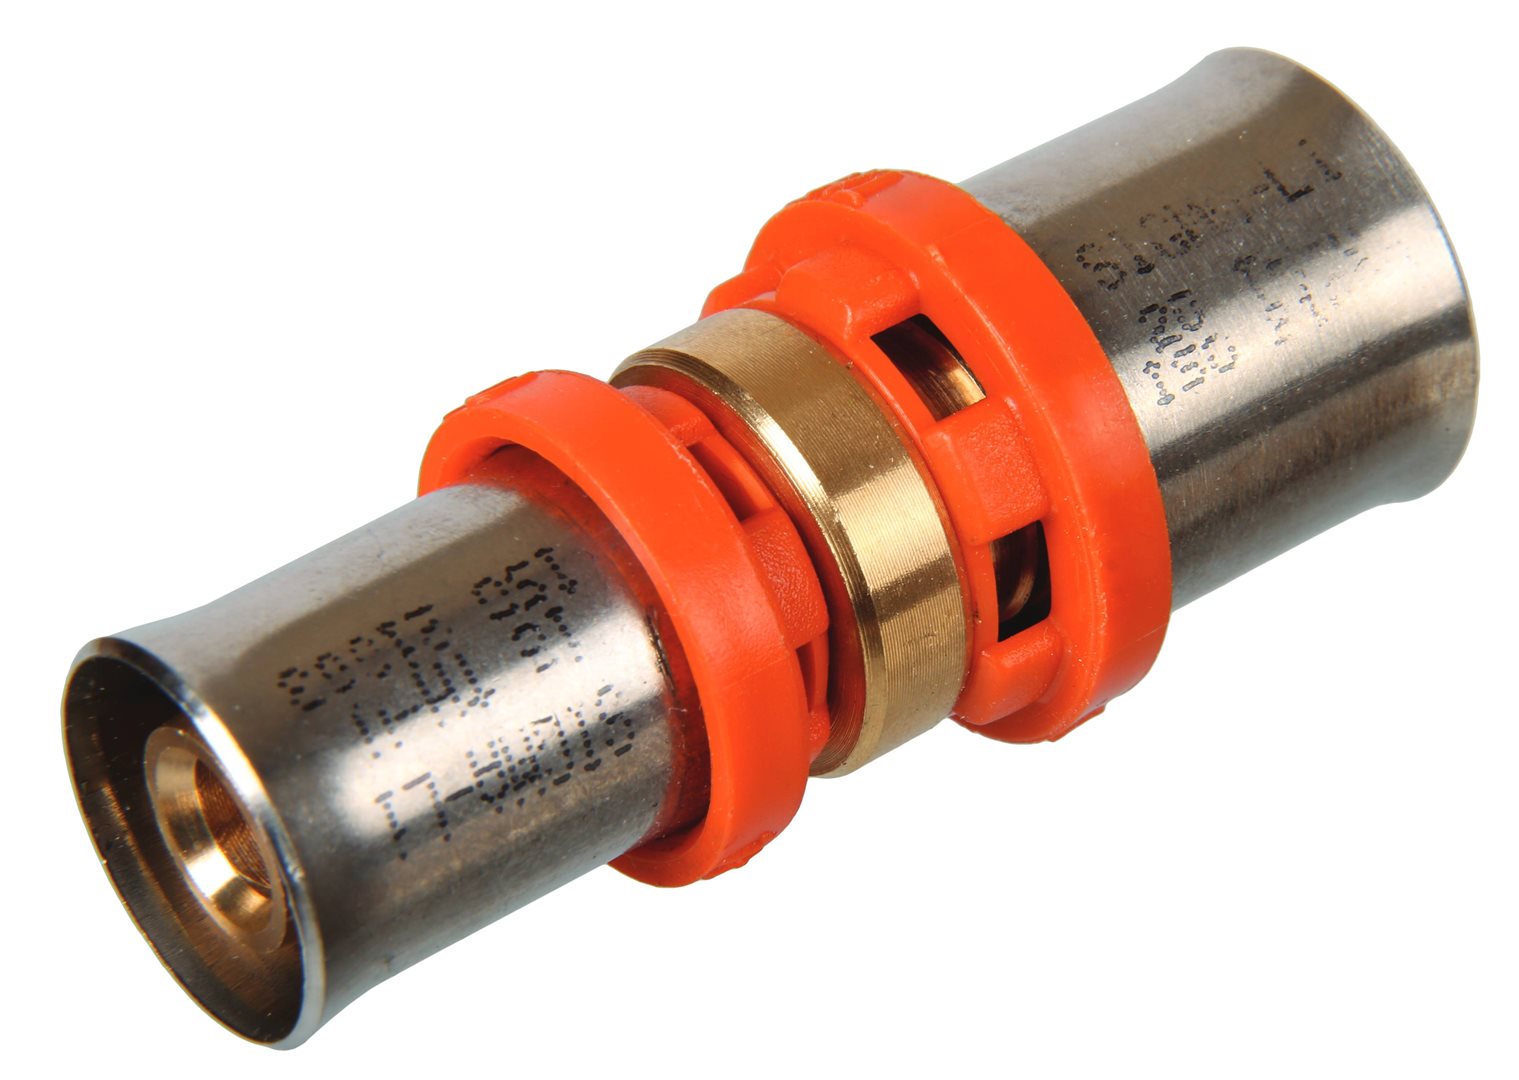 Reduction connector